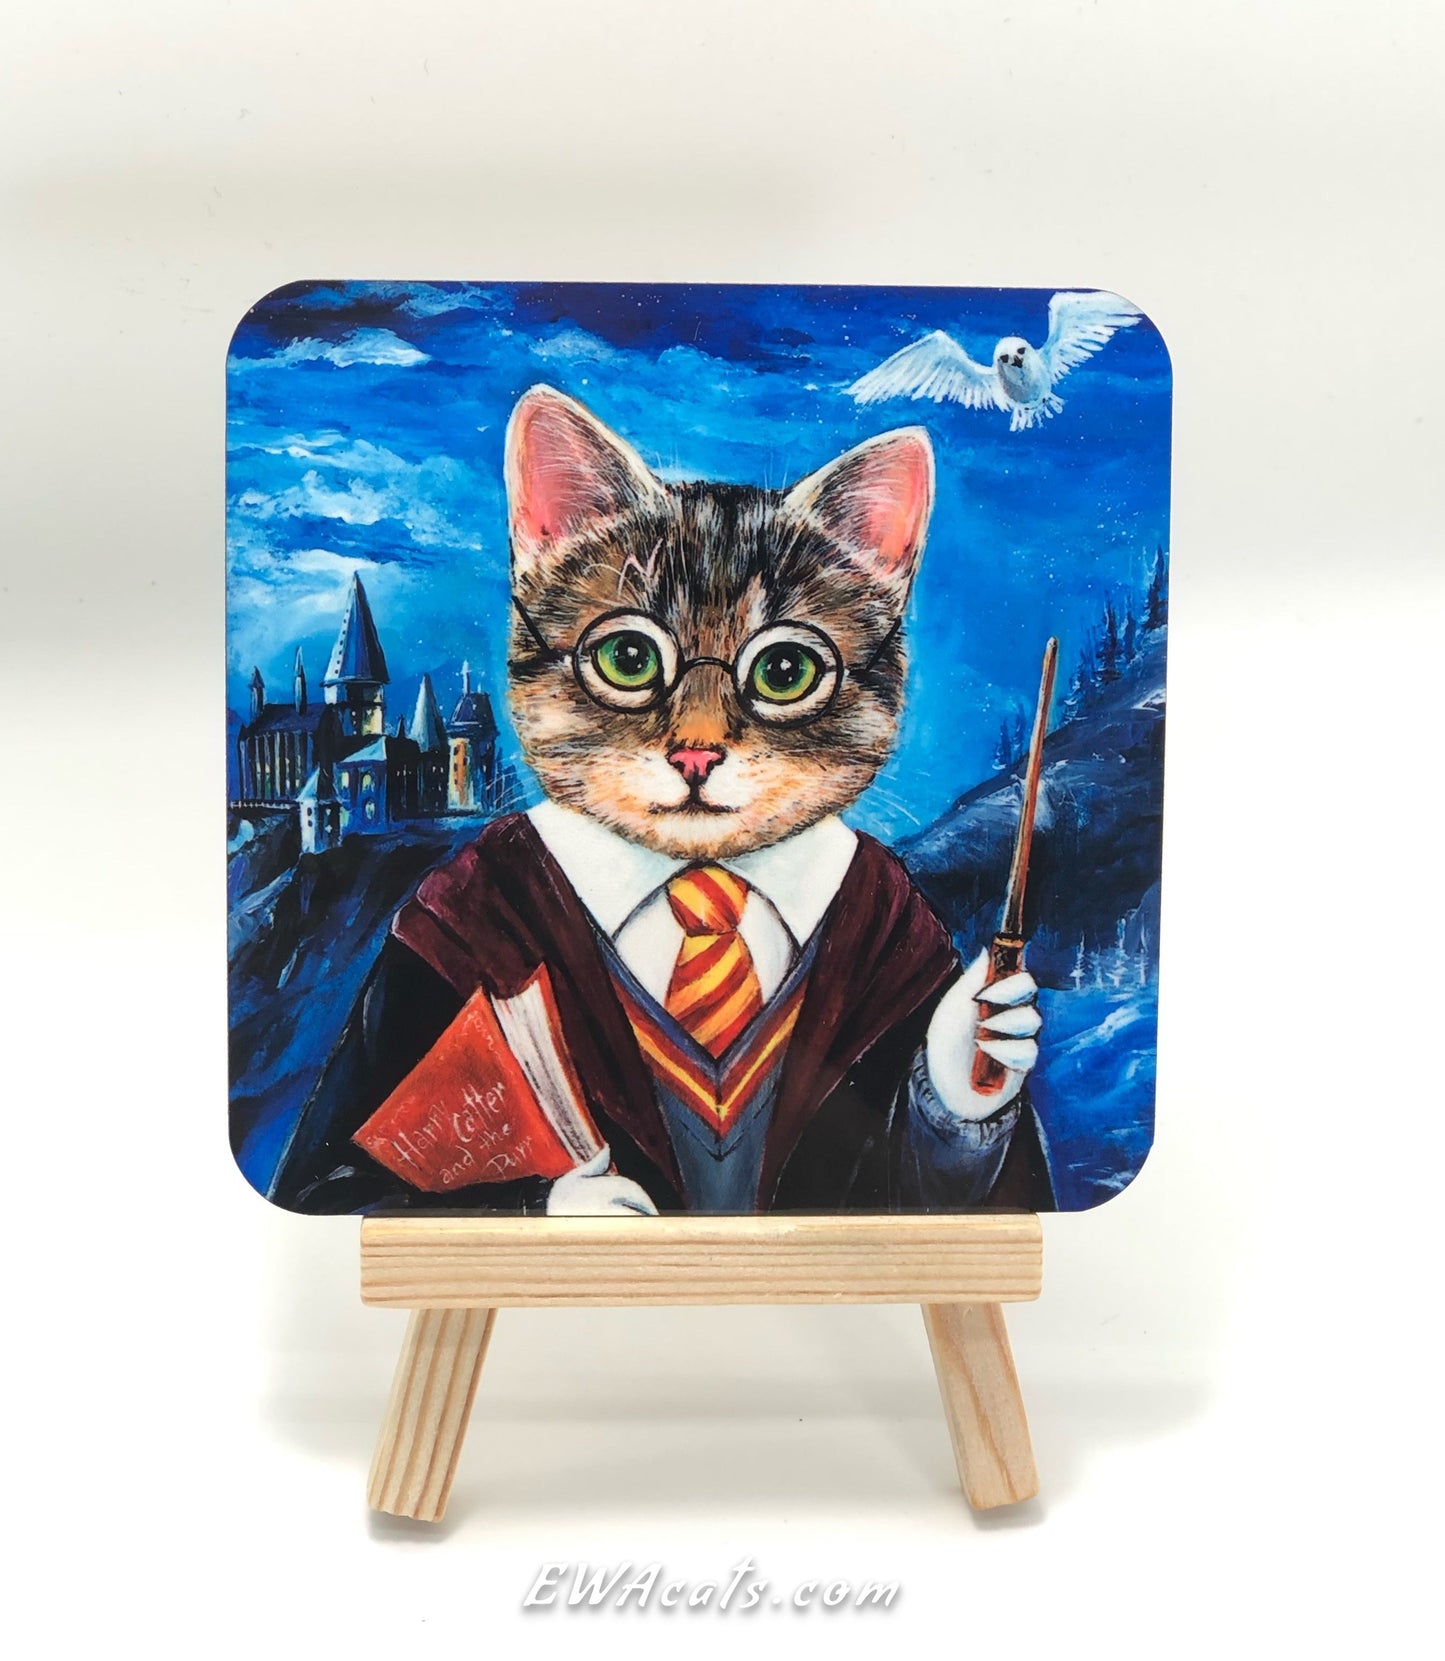 Coaster "Harry Catter"